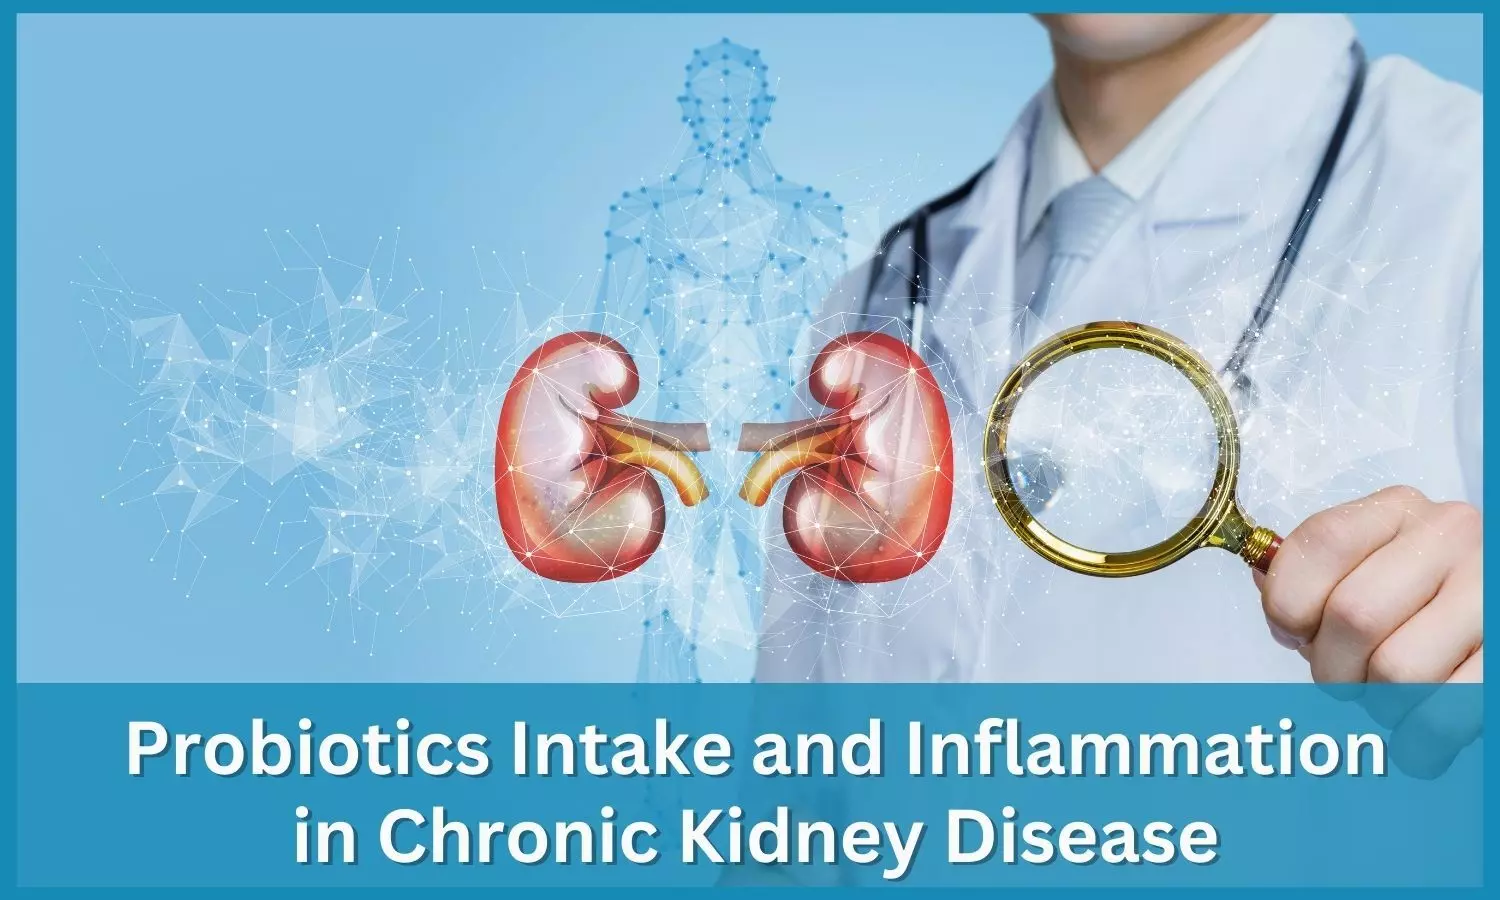 Reducing Inflammatory Markers in Chronic Kidney Disease (CKD) - Role of Probiotics